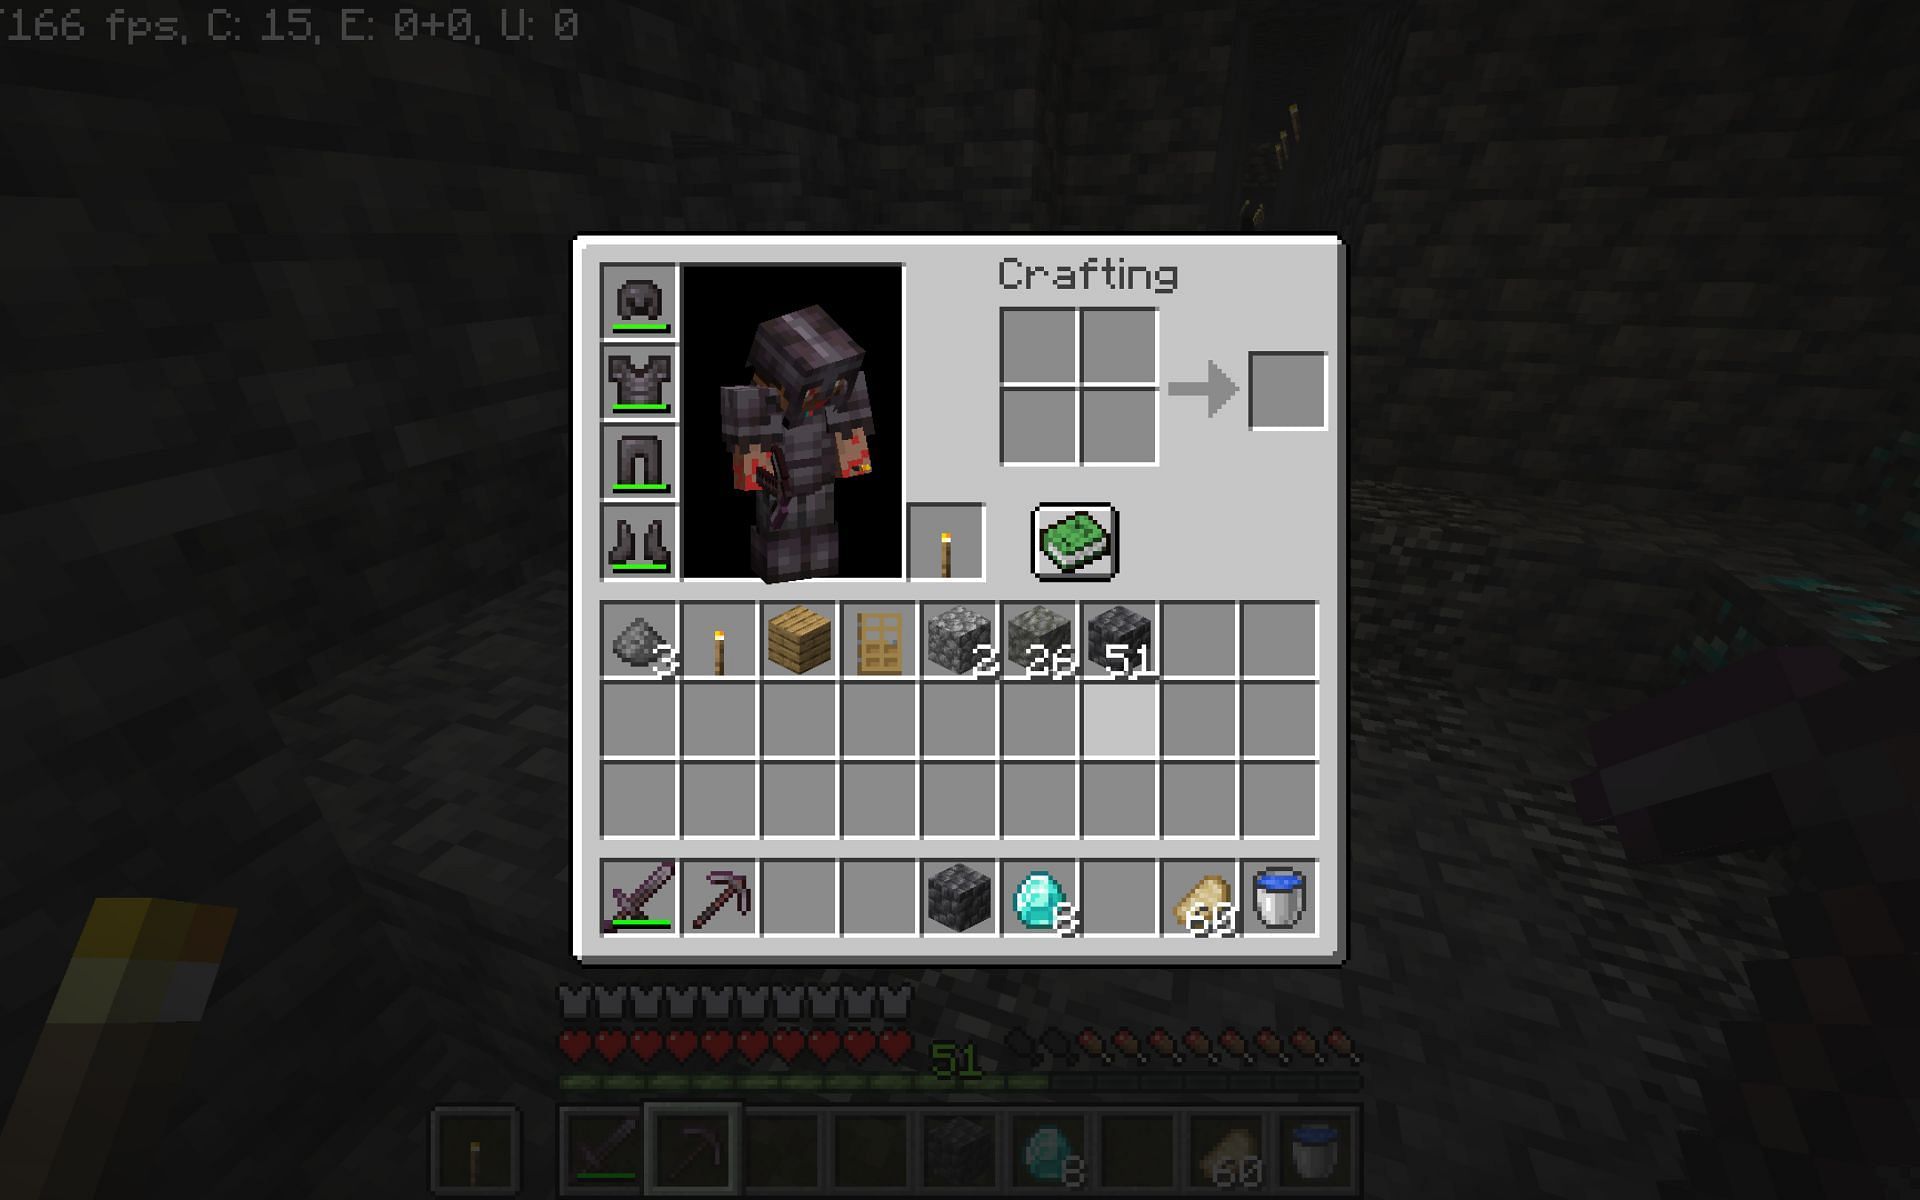 Inventory management features can be added to the game (Image via Mojang Studios)